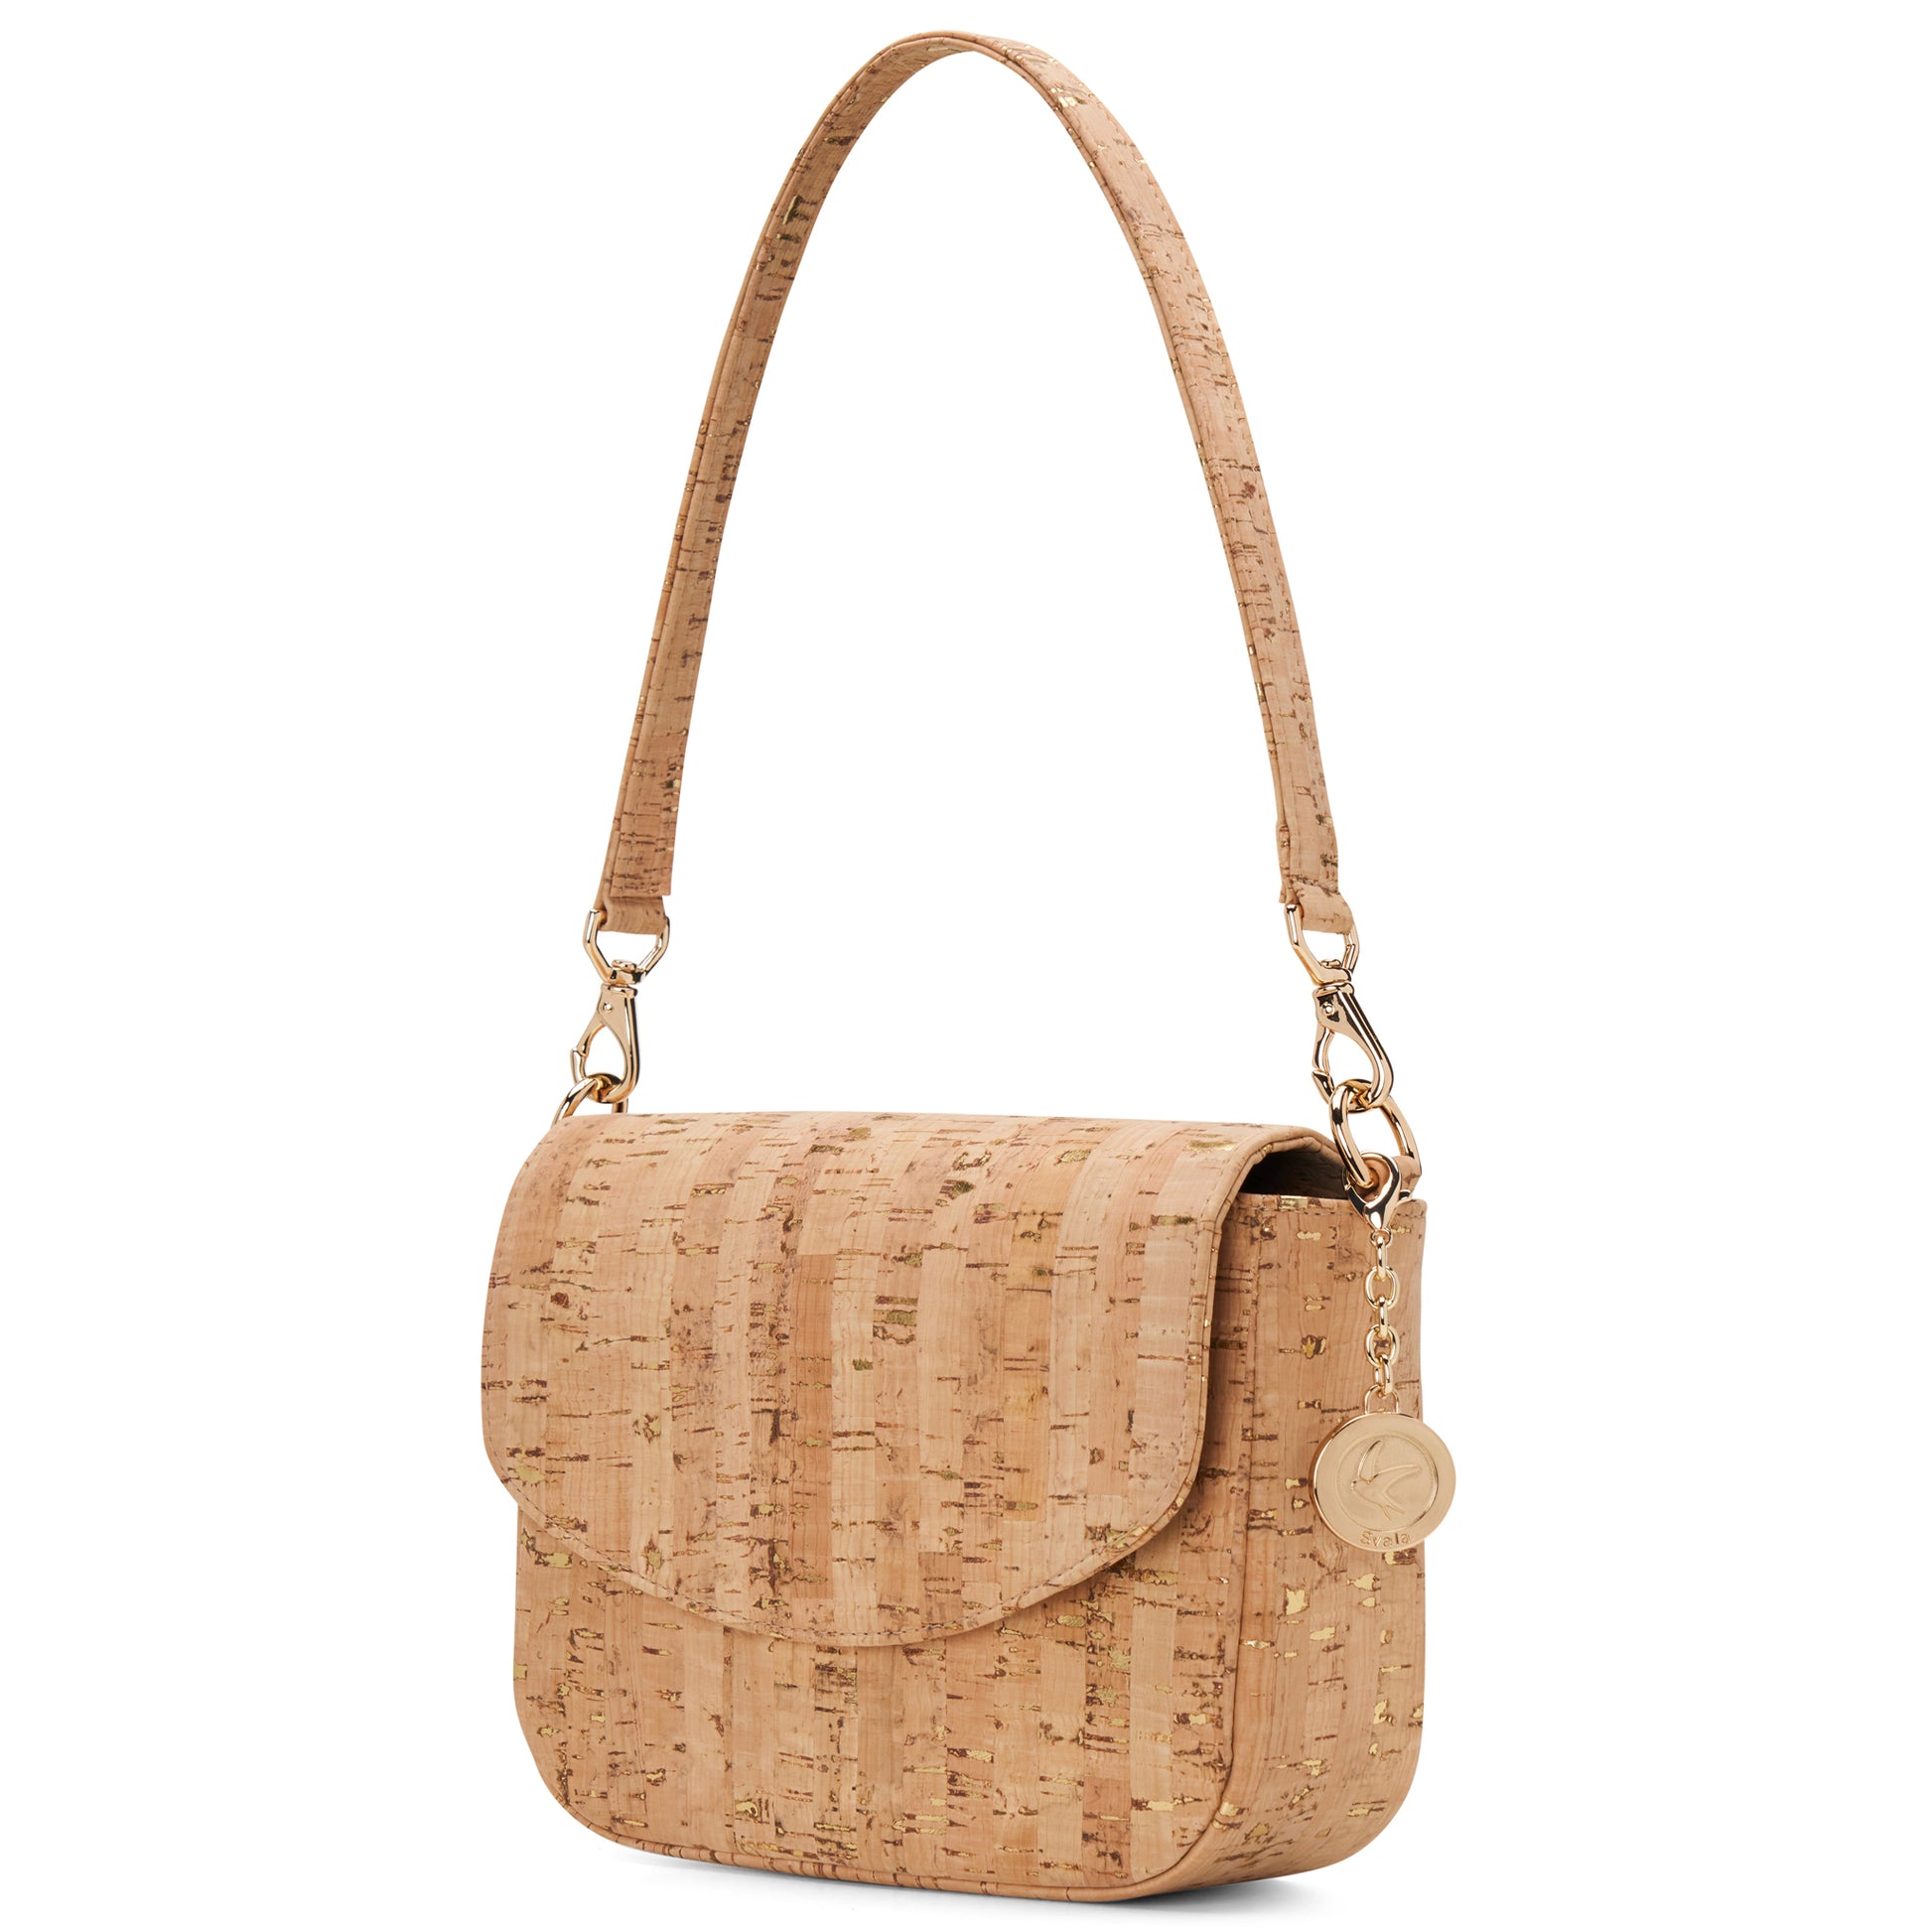 235 Cork Handbags Royalty-Free Photos and Stock Images | Shutterstock